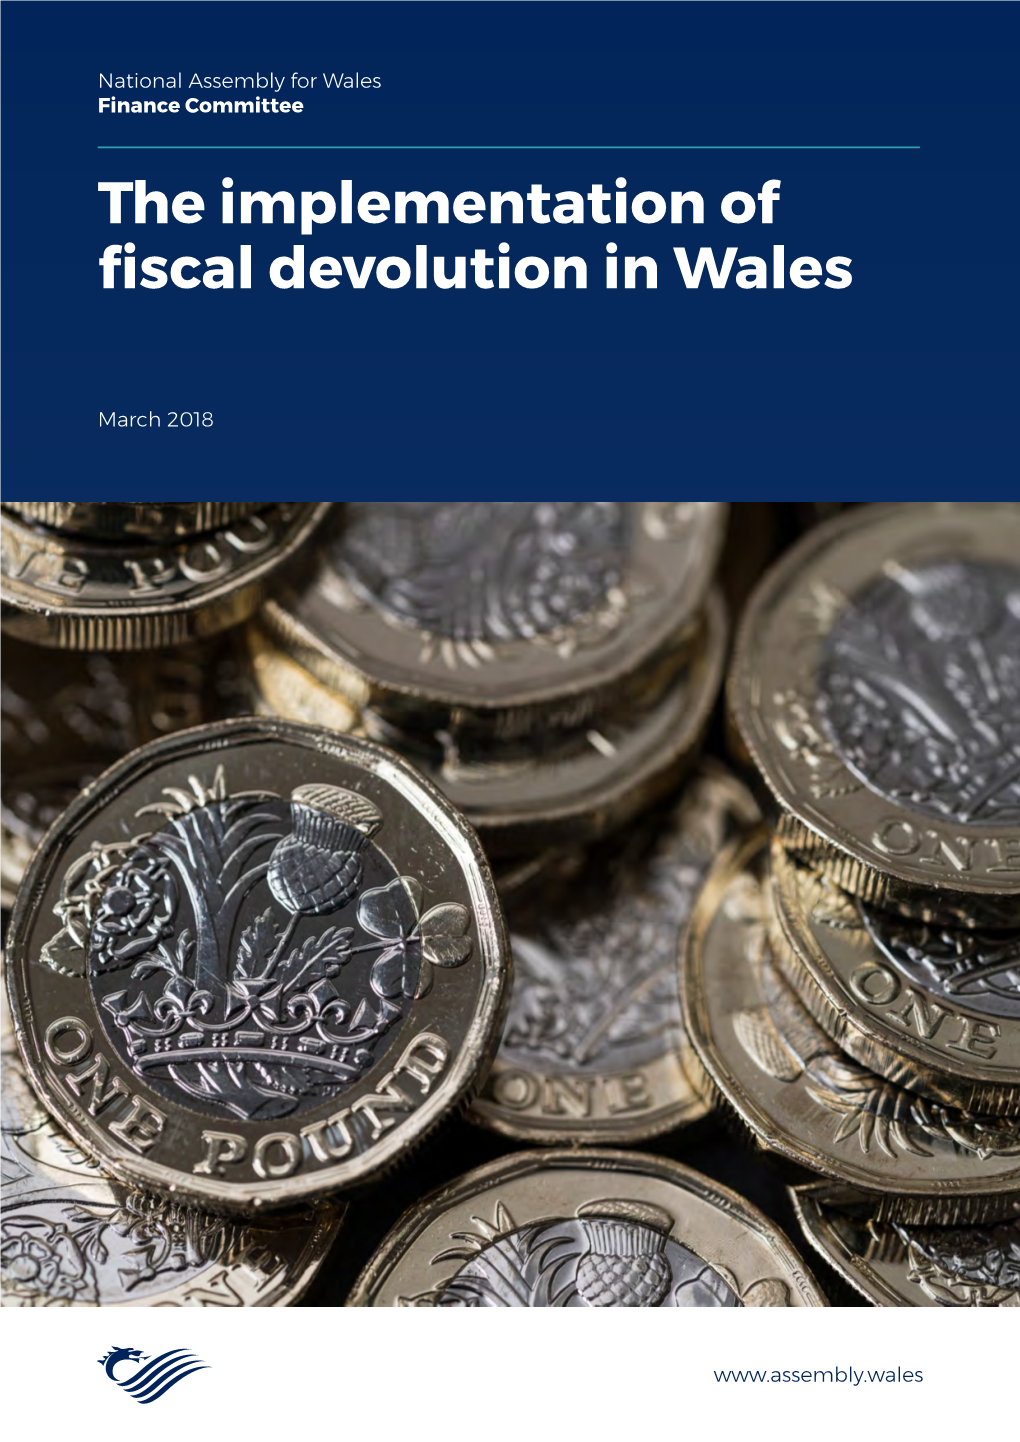 The Implementation of Fiscal Devolution in Wales